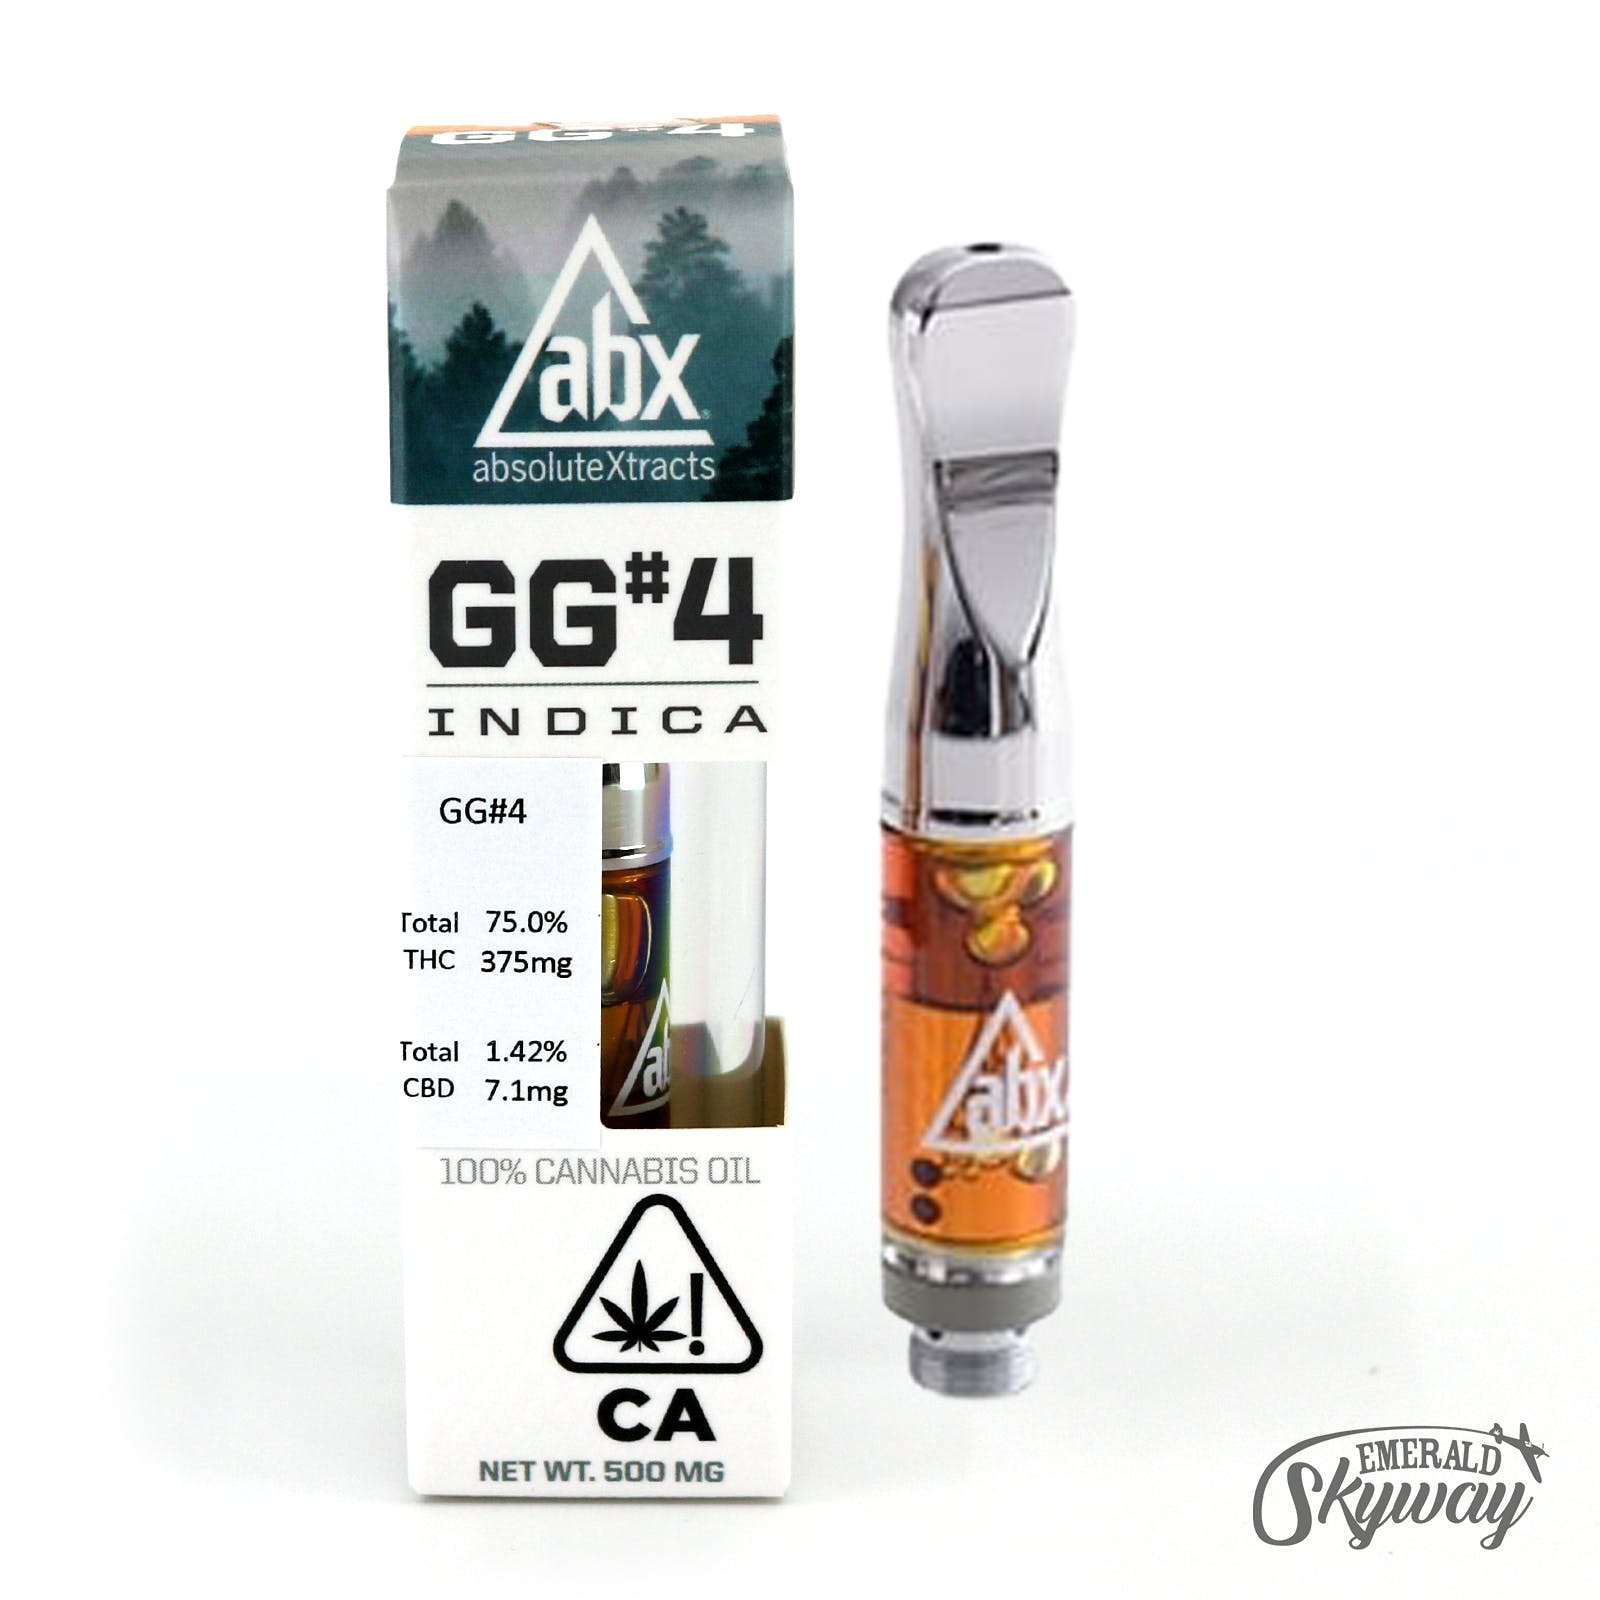 AbsoluteXtracts: GG#4 Cartridge